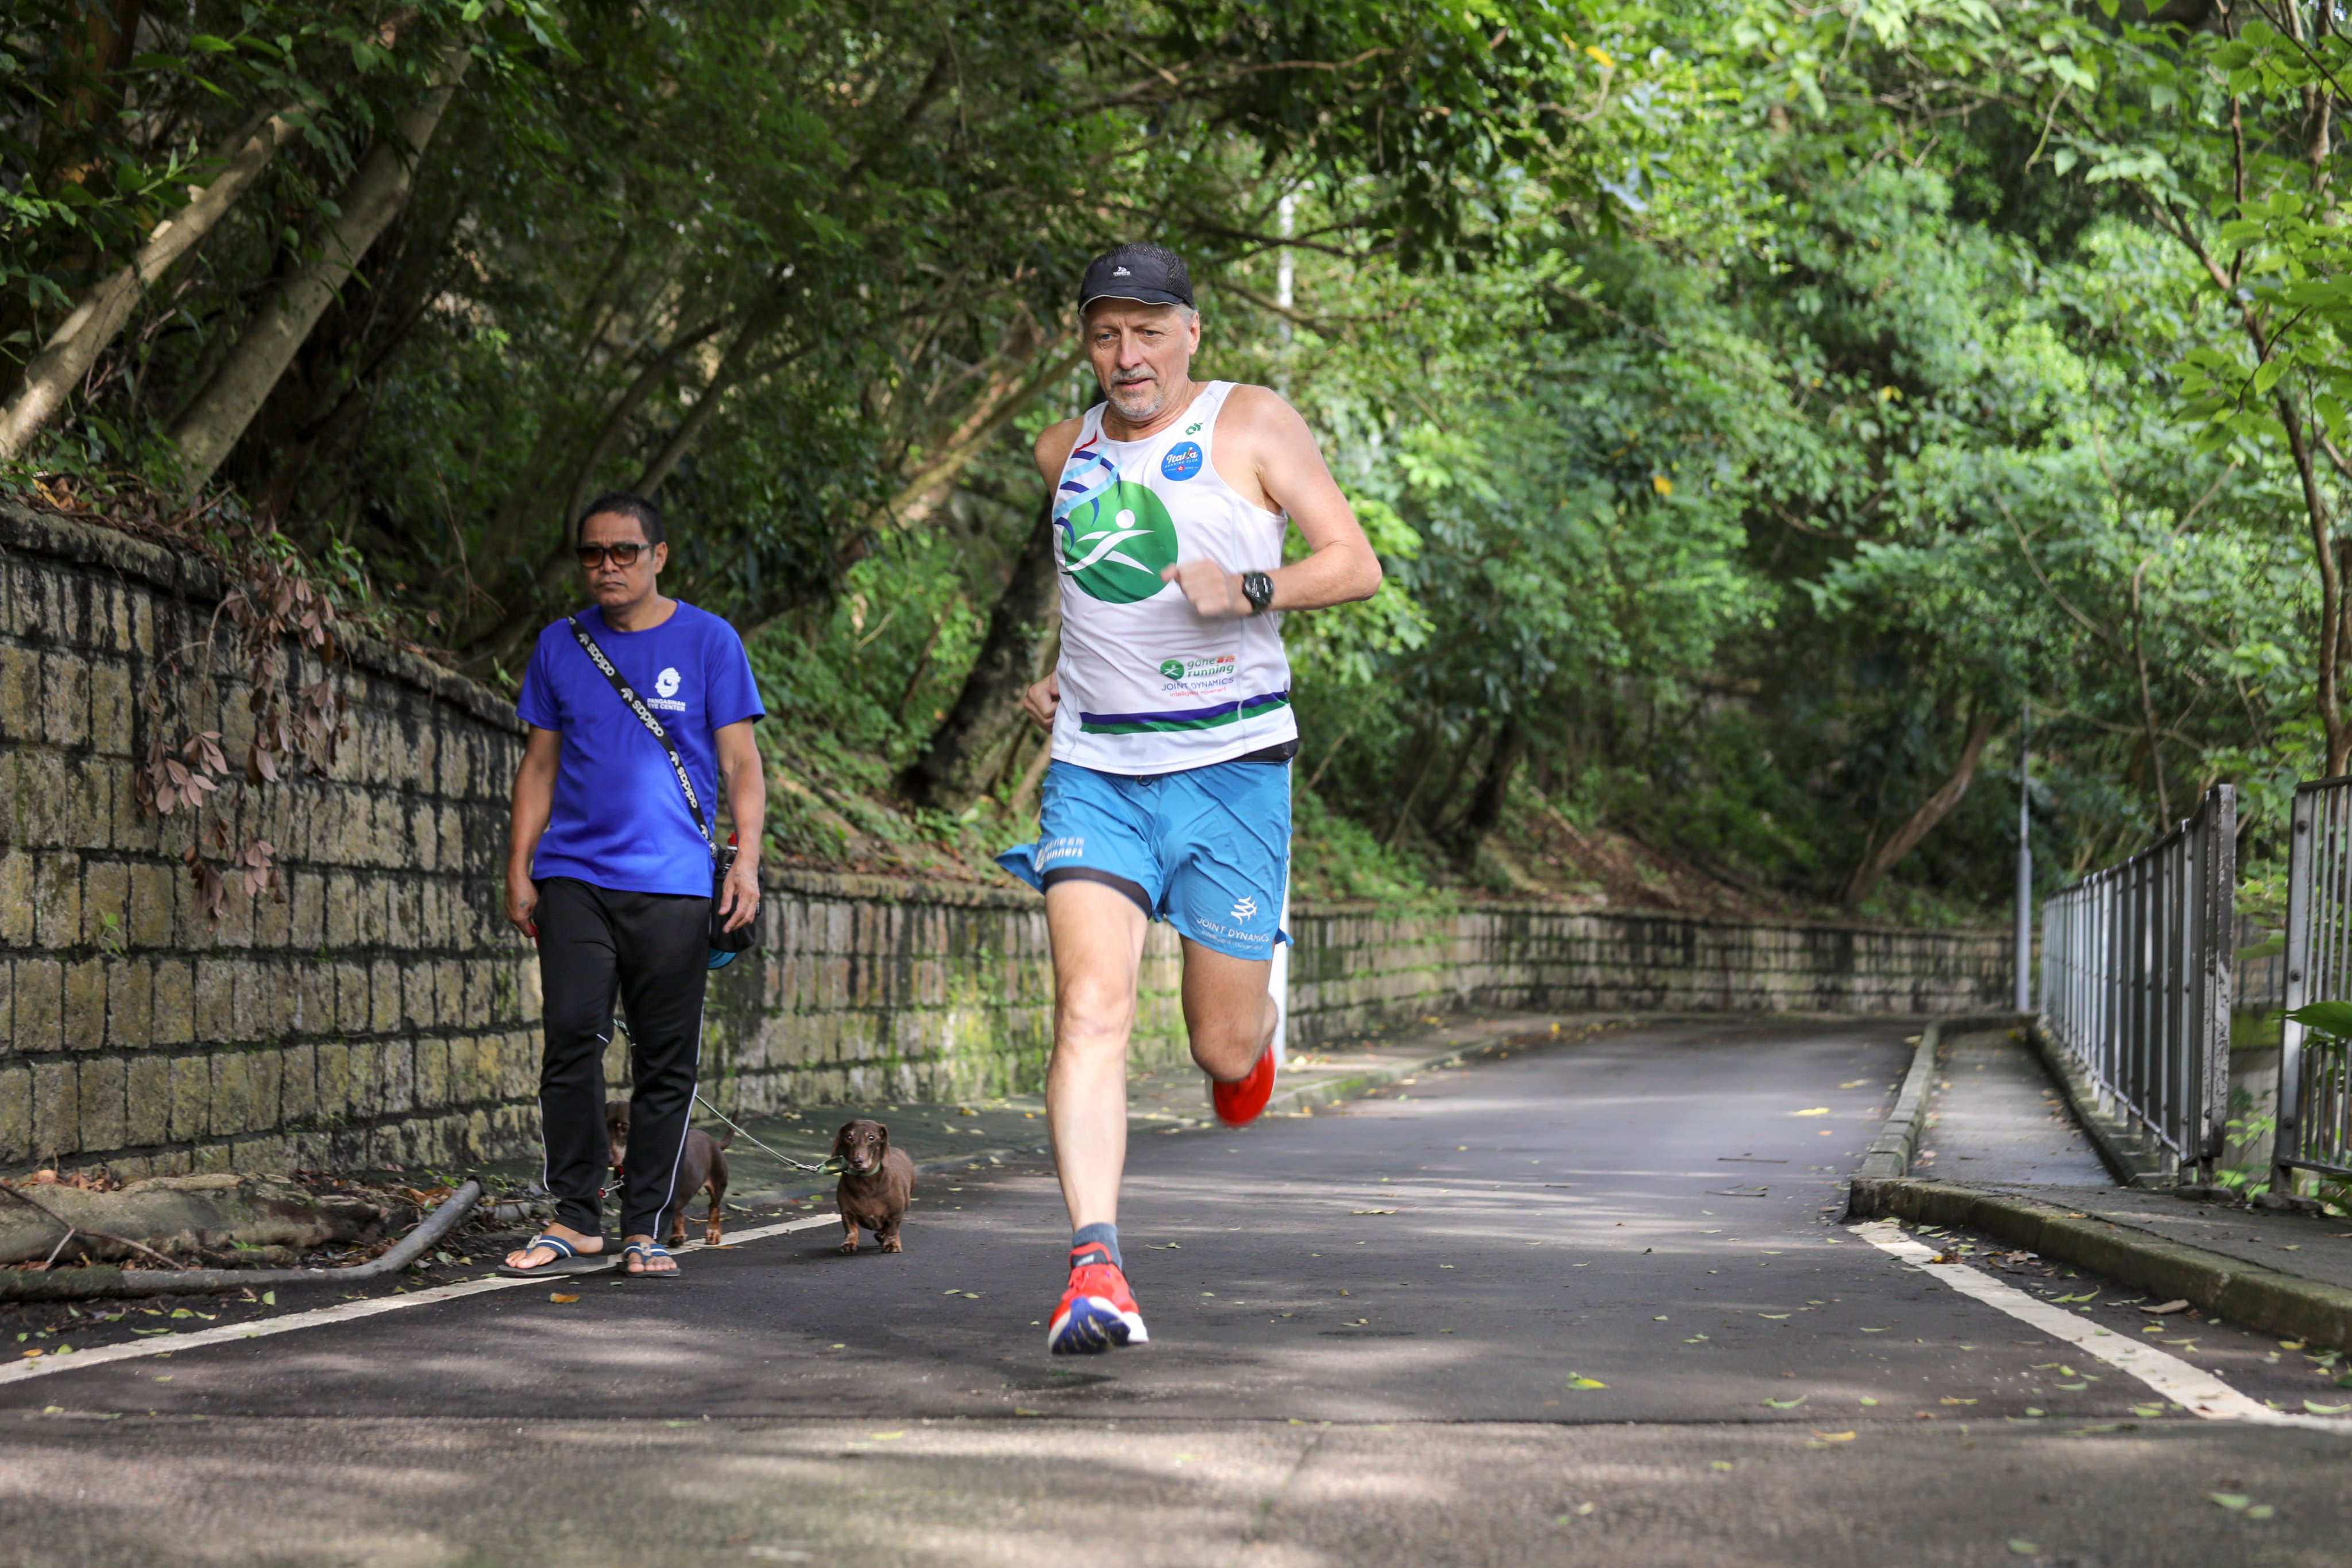 Peter Hopper, 64, runs on Bowen Road, Hong Kong. The running coach set himself a challenge on his 60th birthday – to run at least 5km a day for 10 years. He’s kept it up for four years, averaging over 10km a day. Photo: Xiaomei Chen